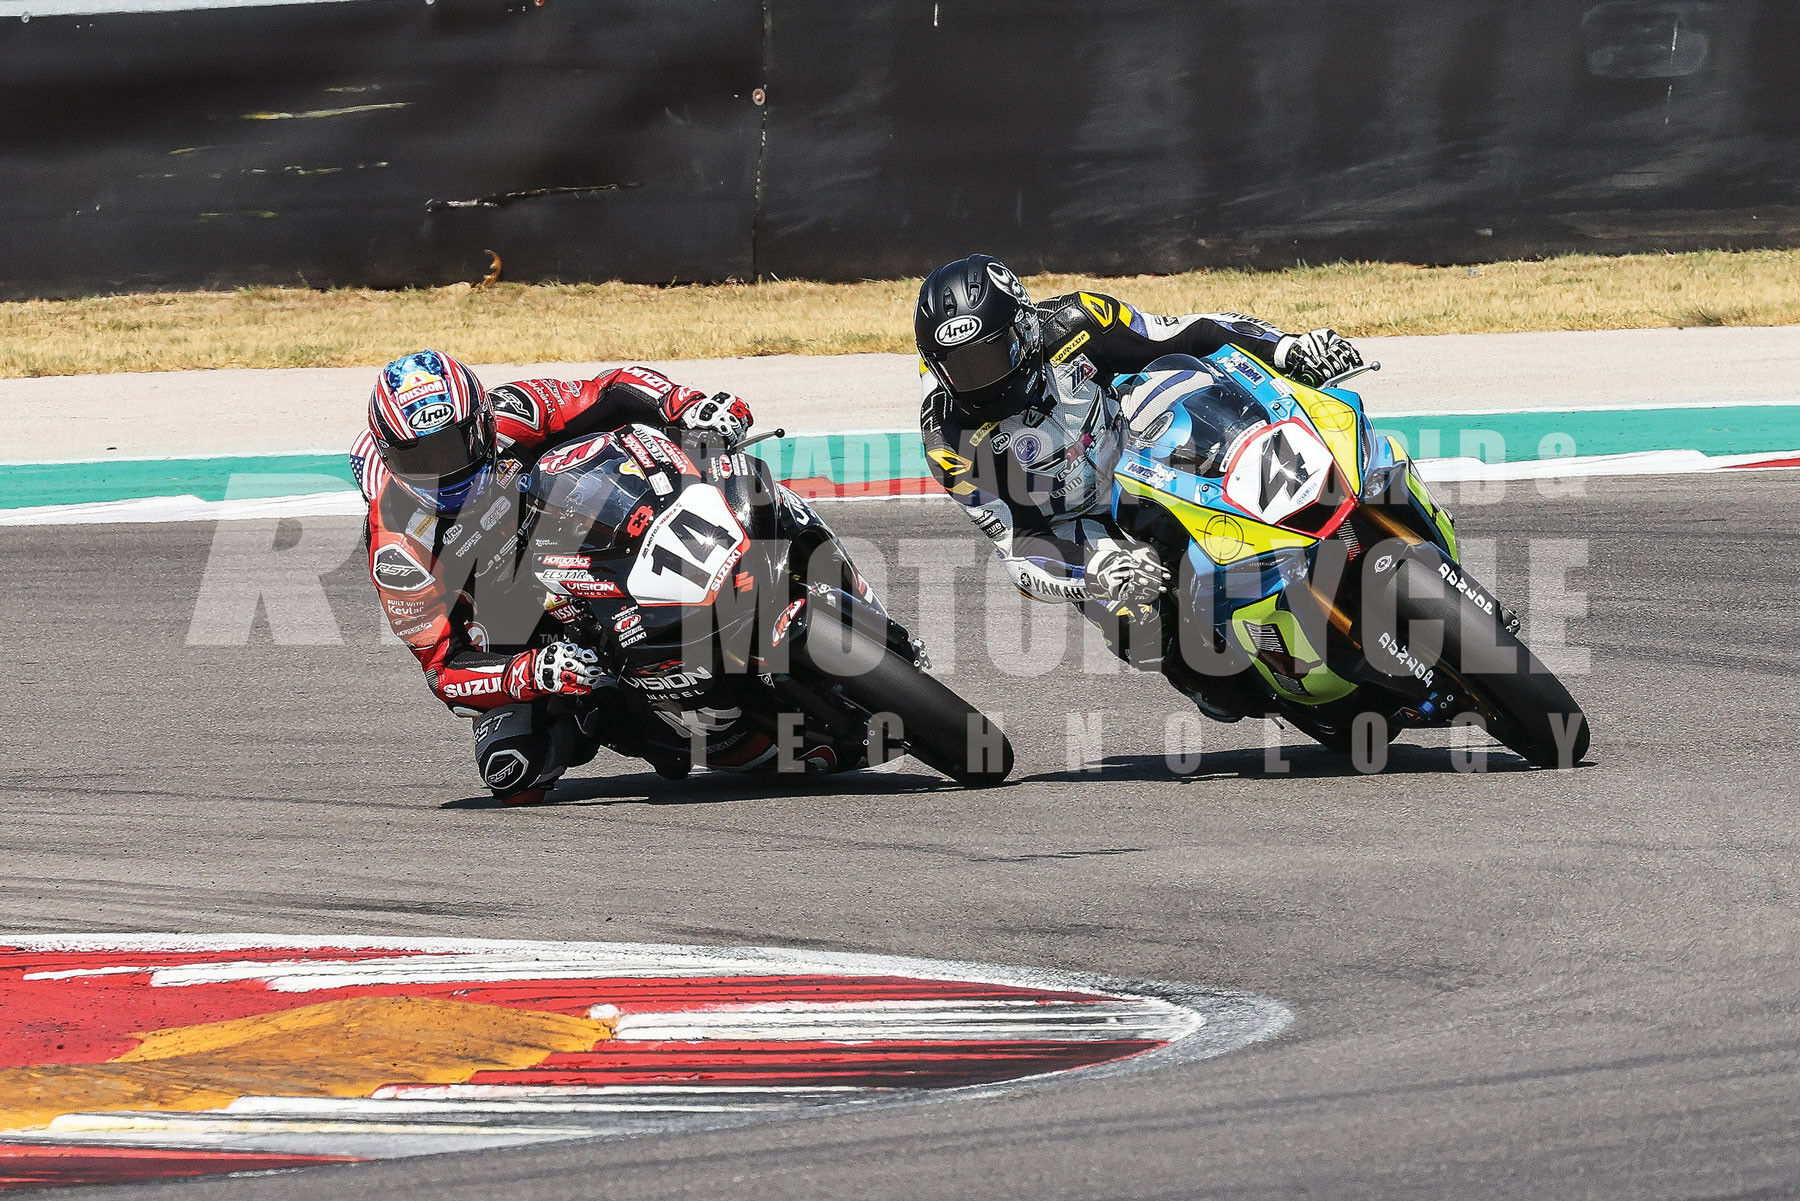 Torin Collins (14) dives past 4-Time AMA Superbike Champion (and race-wins record holder) Josh Hayes (4) on his way to a podium finish in Race Two. Photo by Brian J. Nelson.